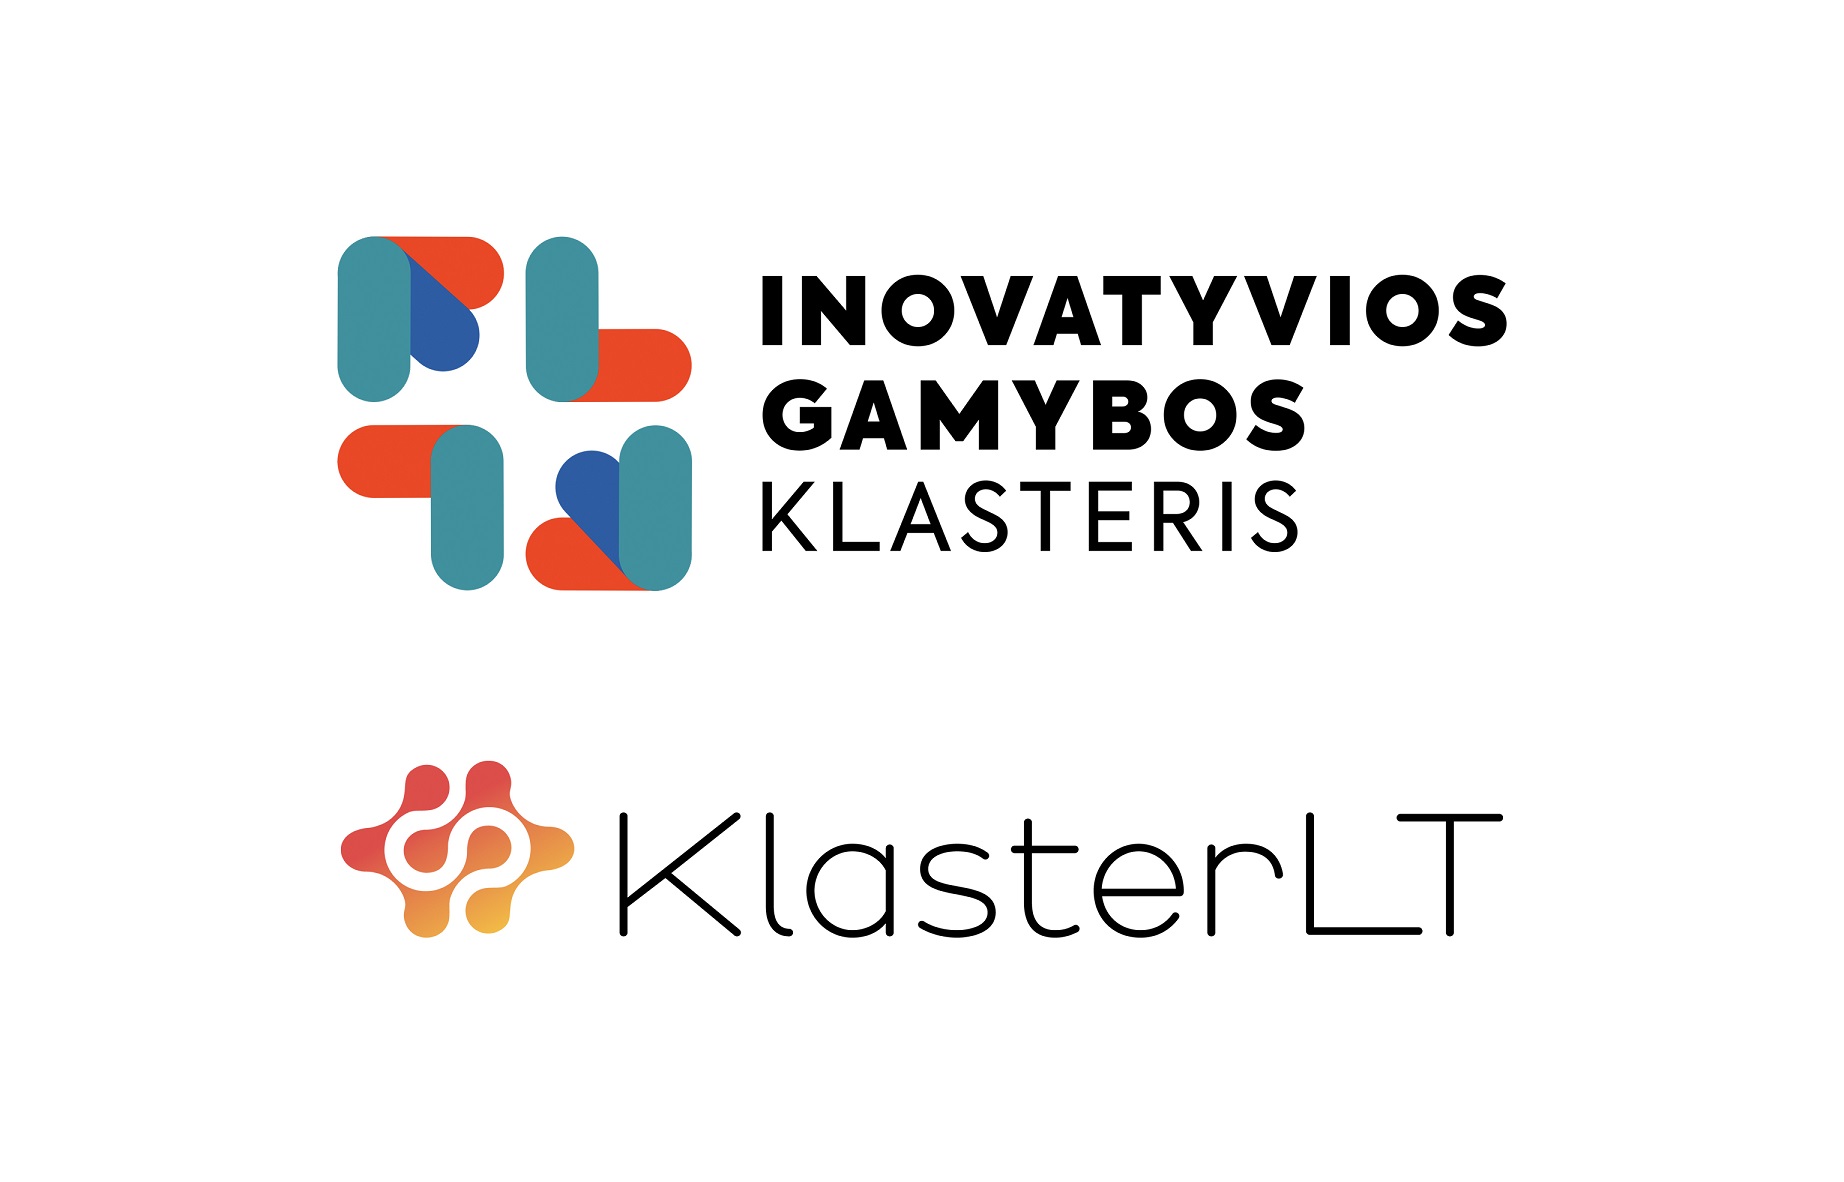 The innovative manufacturing cluster is a part of the Lithuanian cluster community